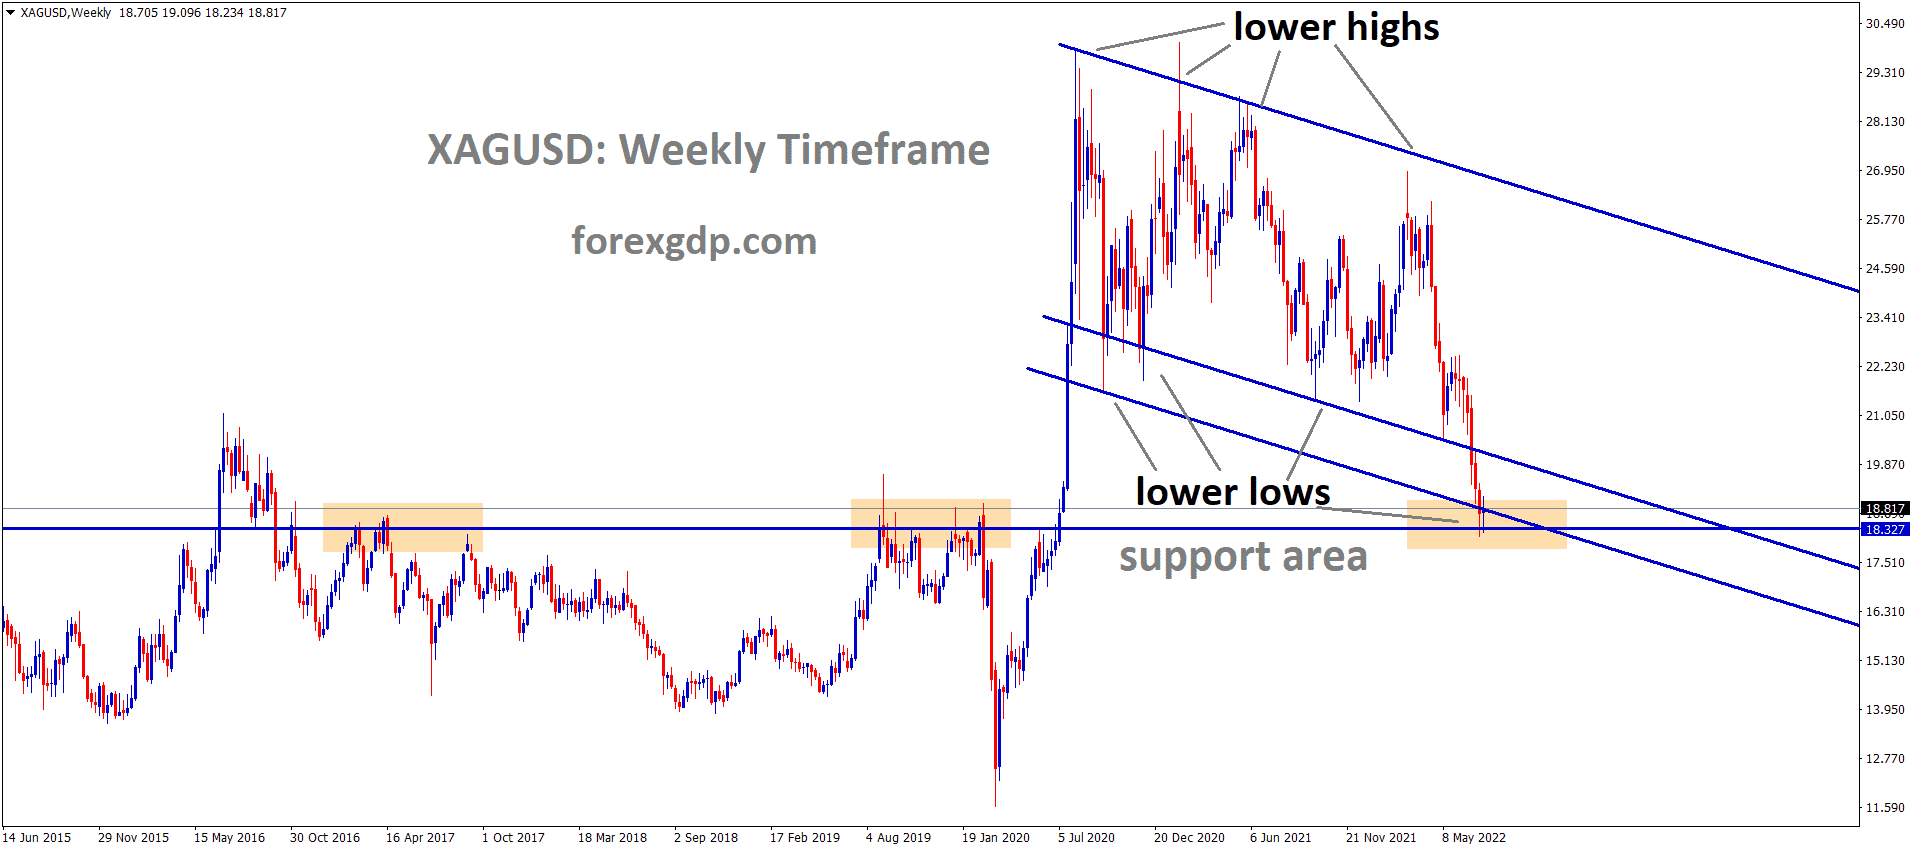 XAGUSD Silver Price is moving in the Descending channel and the Market has reached the Lower Low area and Horizontal support area of the Pattern.